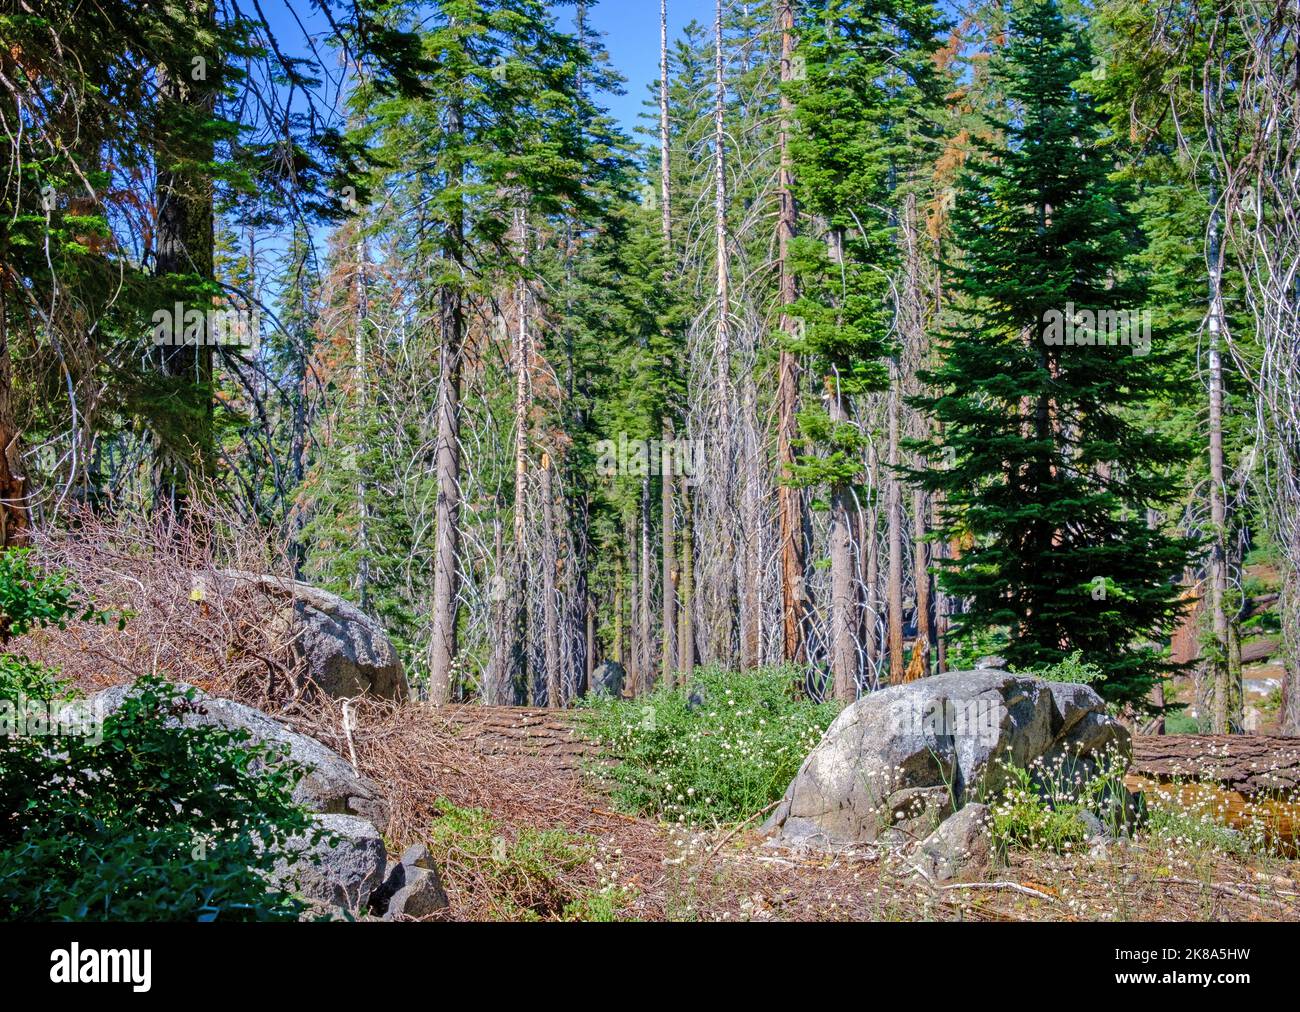 A trail in the wilderness of Yosemite National Park, California, with ponderosa pine trees, & rocks. Dry pine needles on the ground & some snag trees Stock Photo